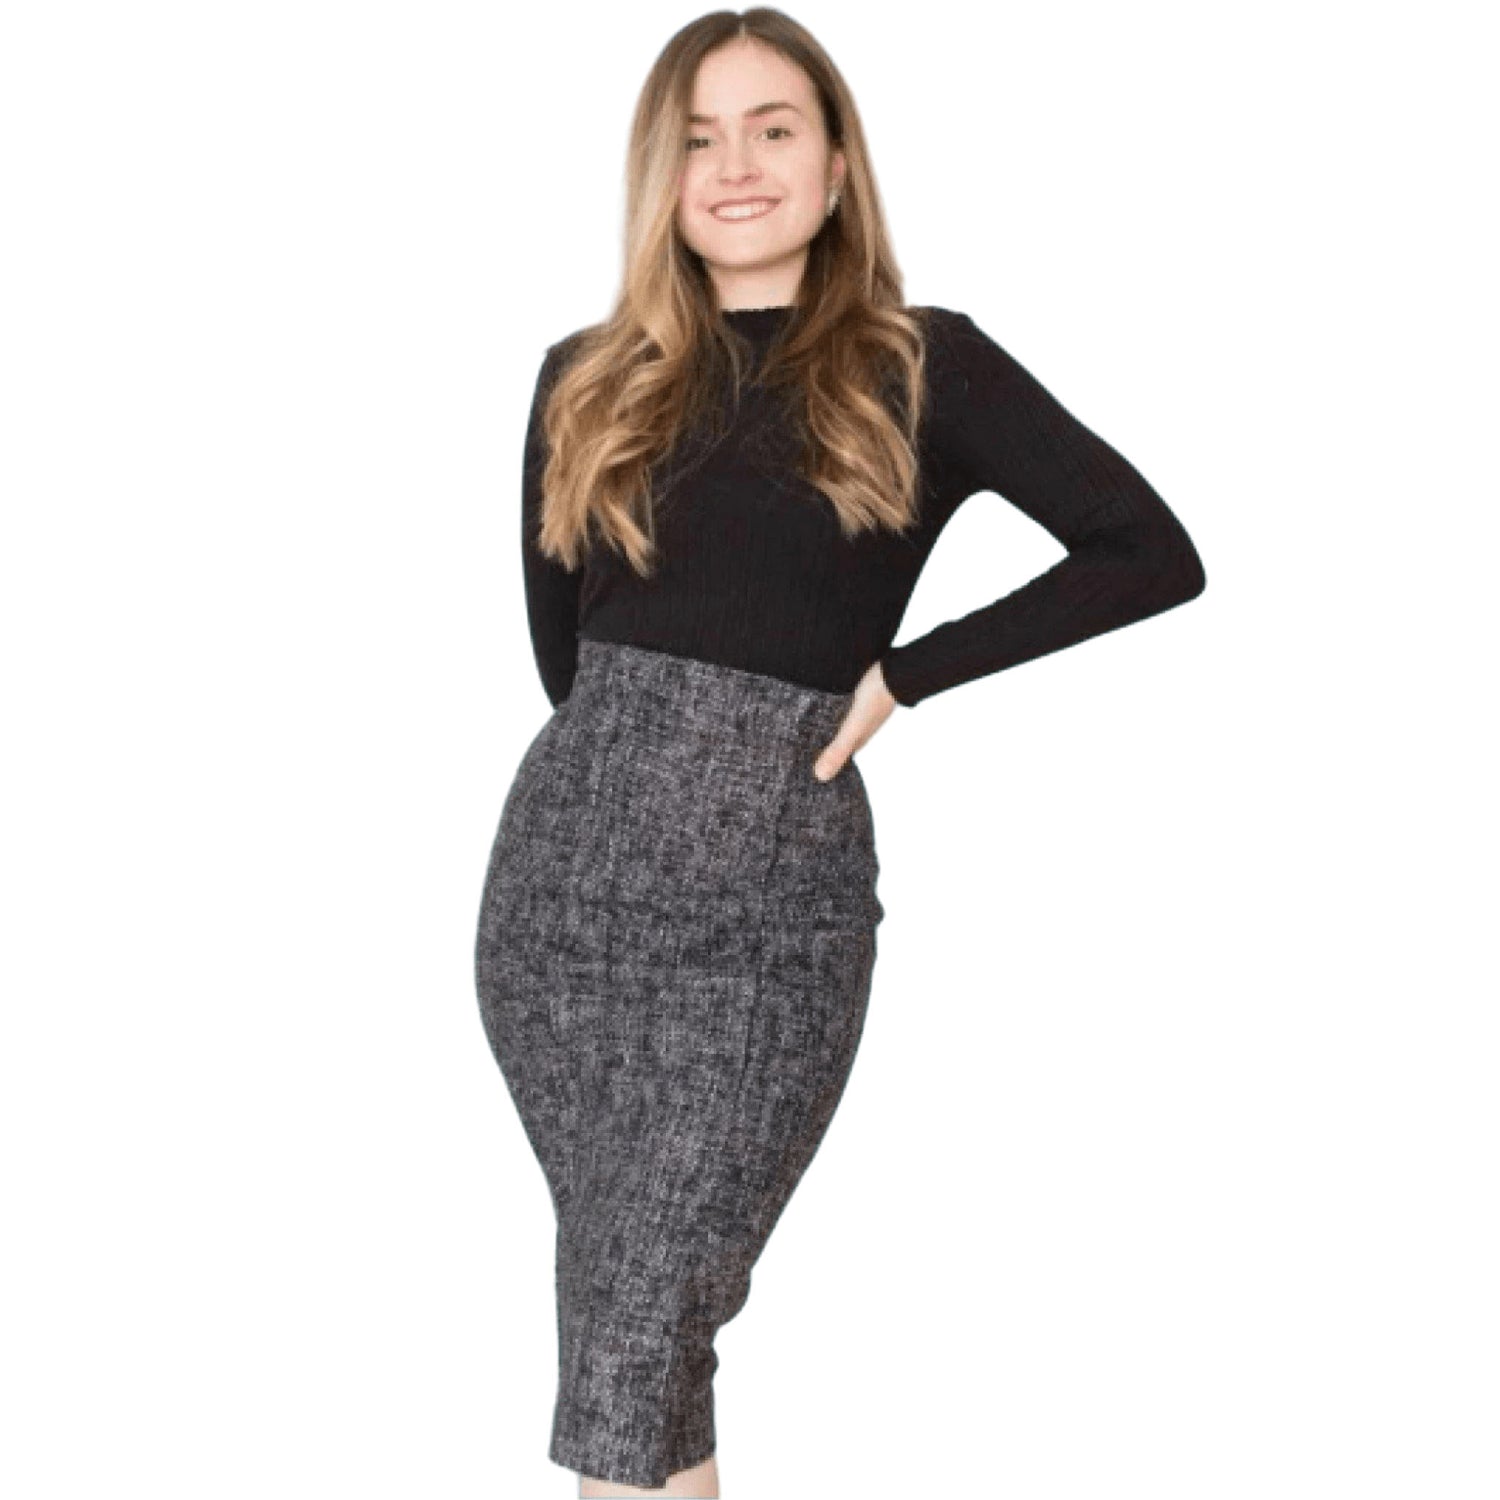 Women on a while background wearing a grey knee length pencil skirt and black long sleeve top.